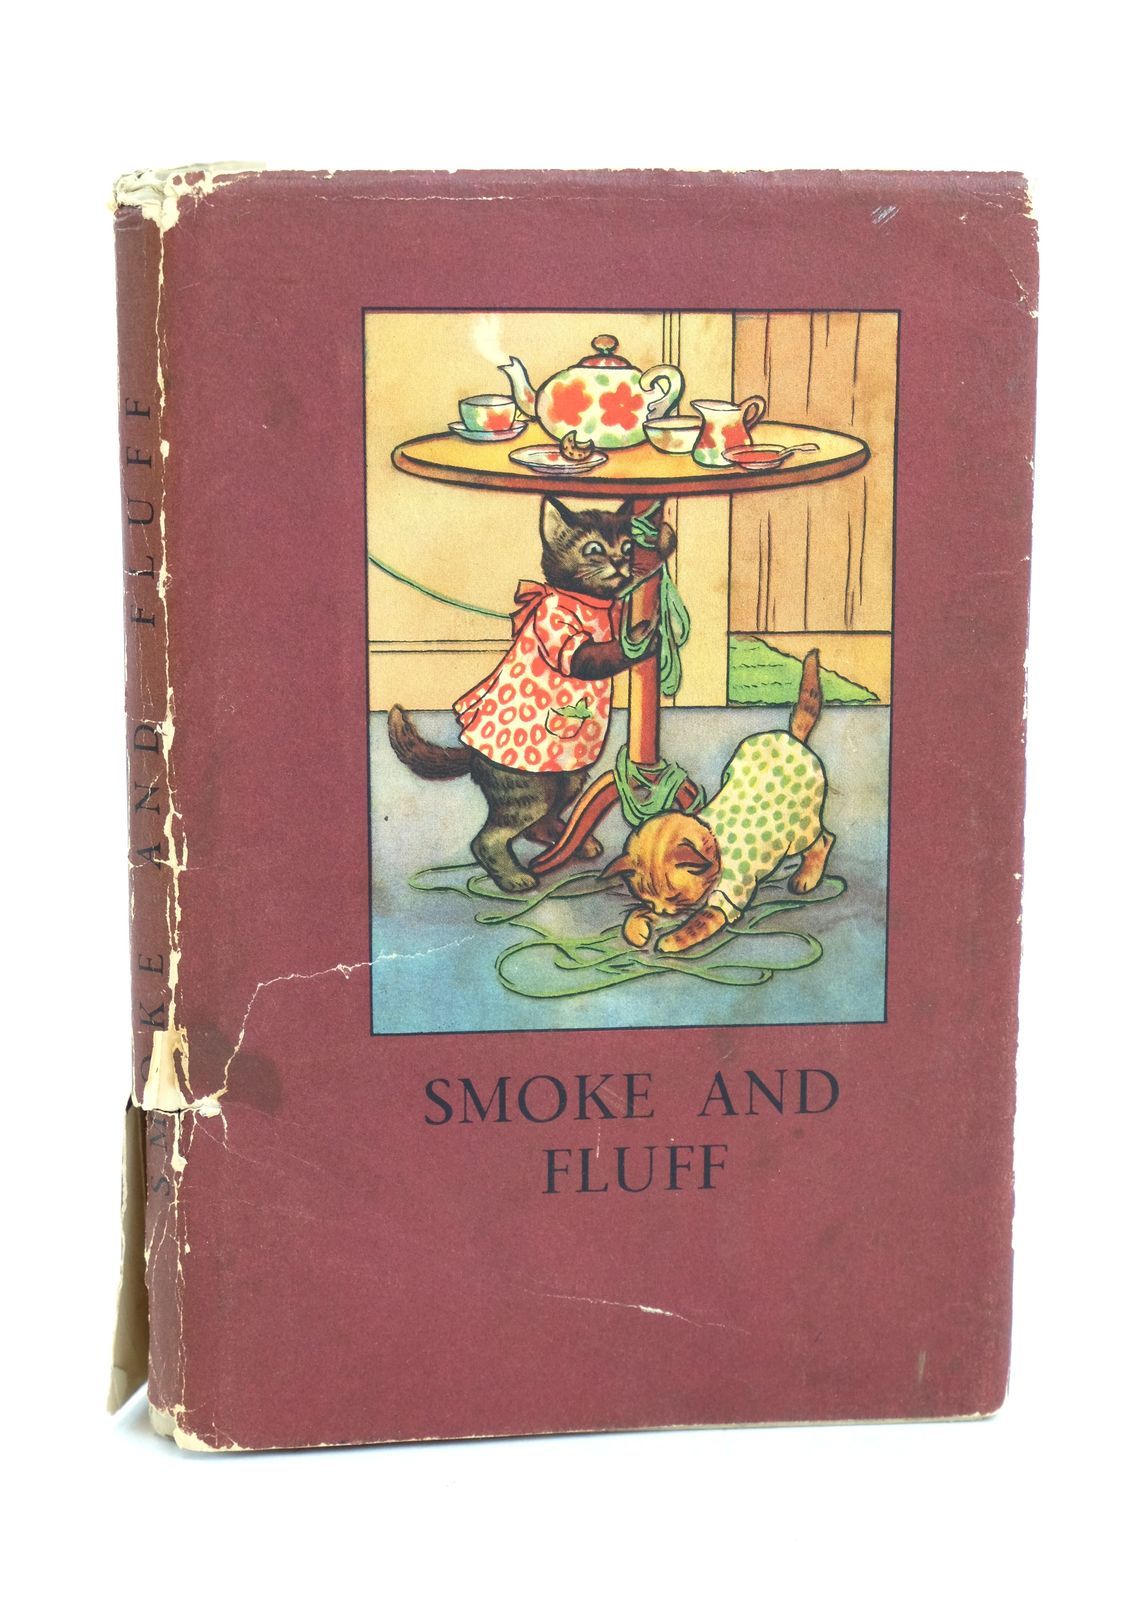 Photo of SMOKE AND FLUFF written by Perring, W.
Macgregor, A.J. illustrated by Macgregor, A.J. published by Wills & Hepworth Ltd. (STOCK CODE: 1318604)  for sale by Stella & Rose's Books